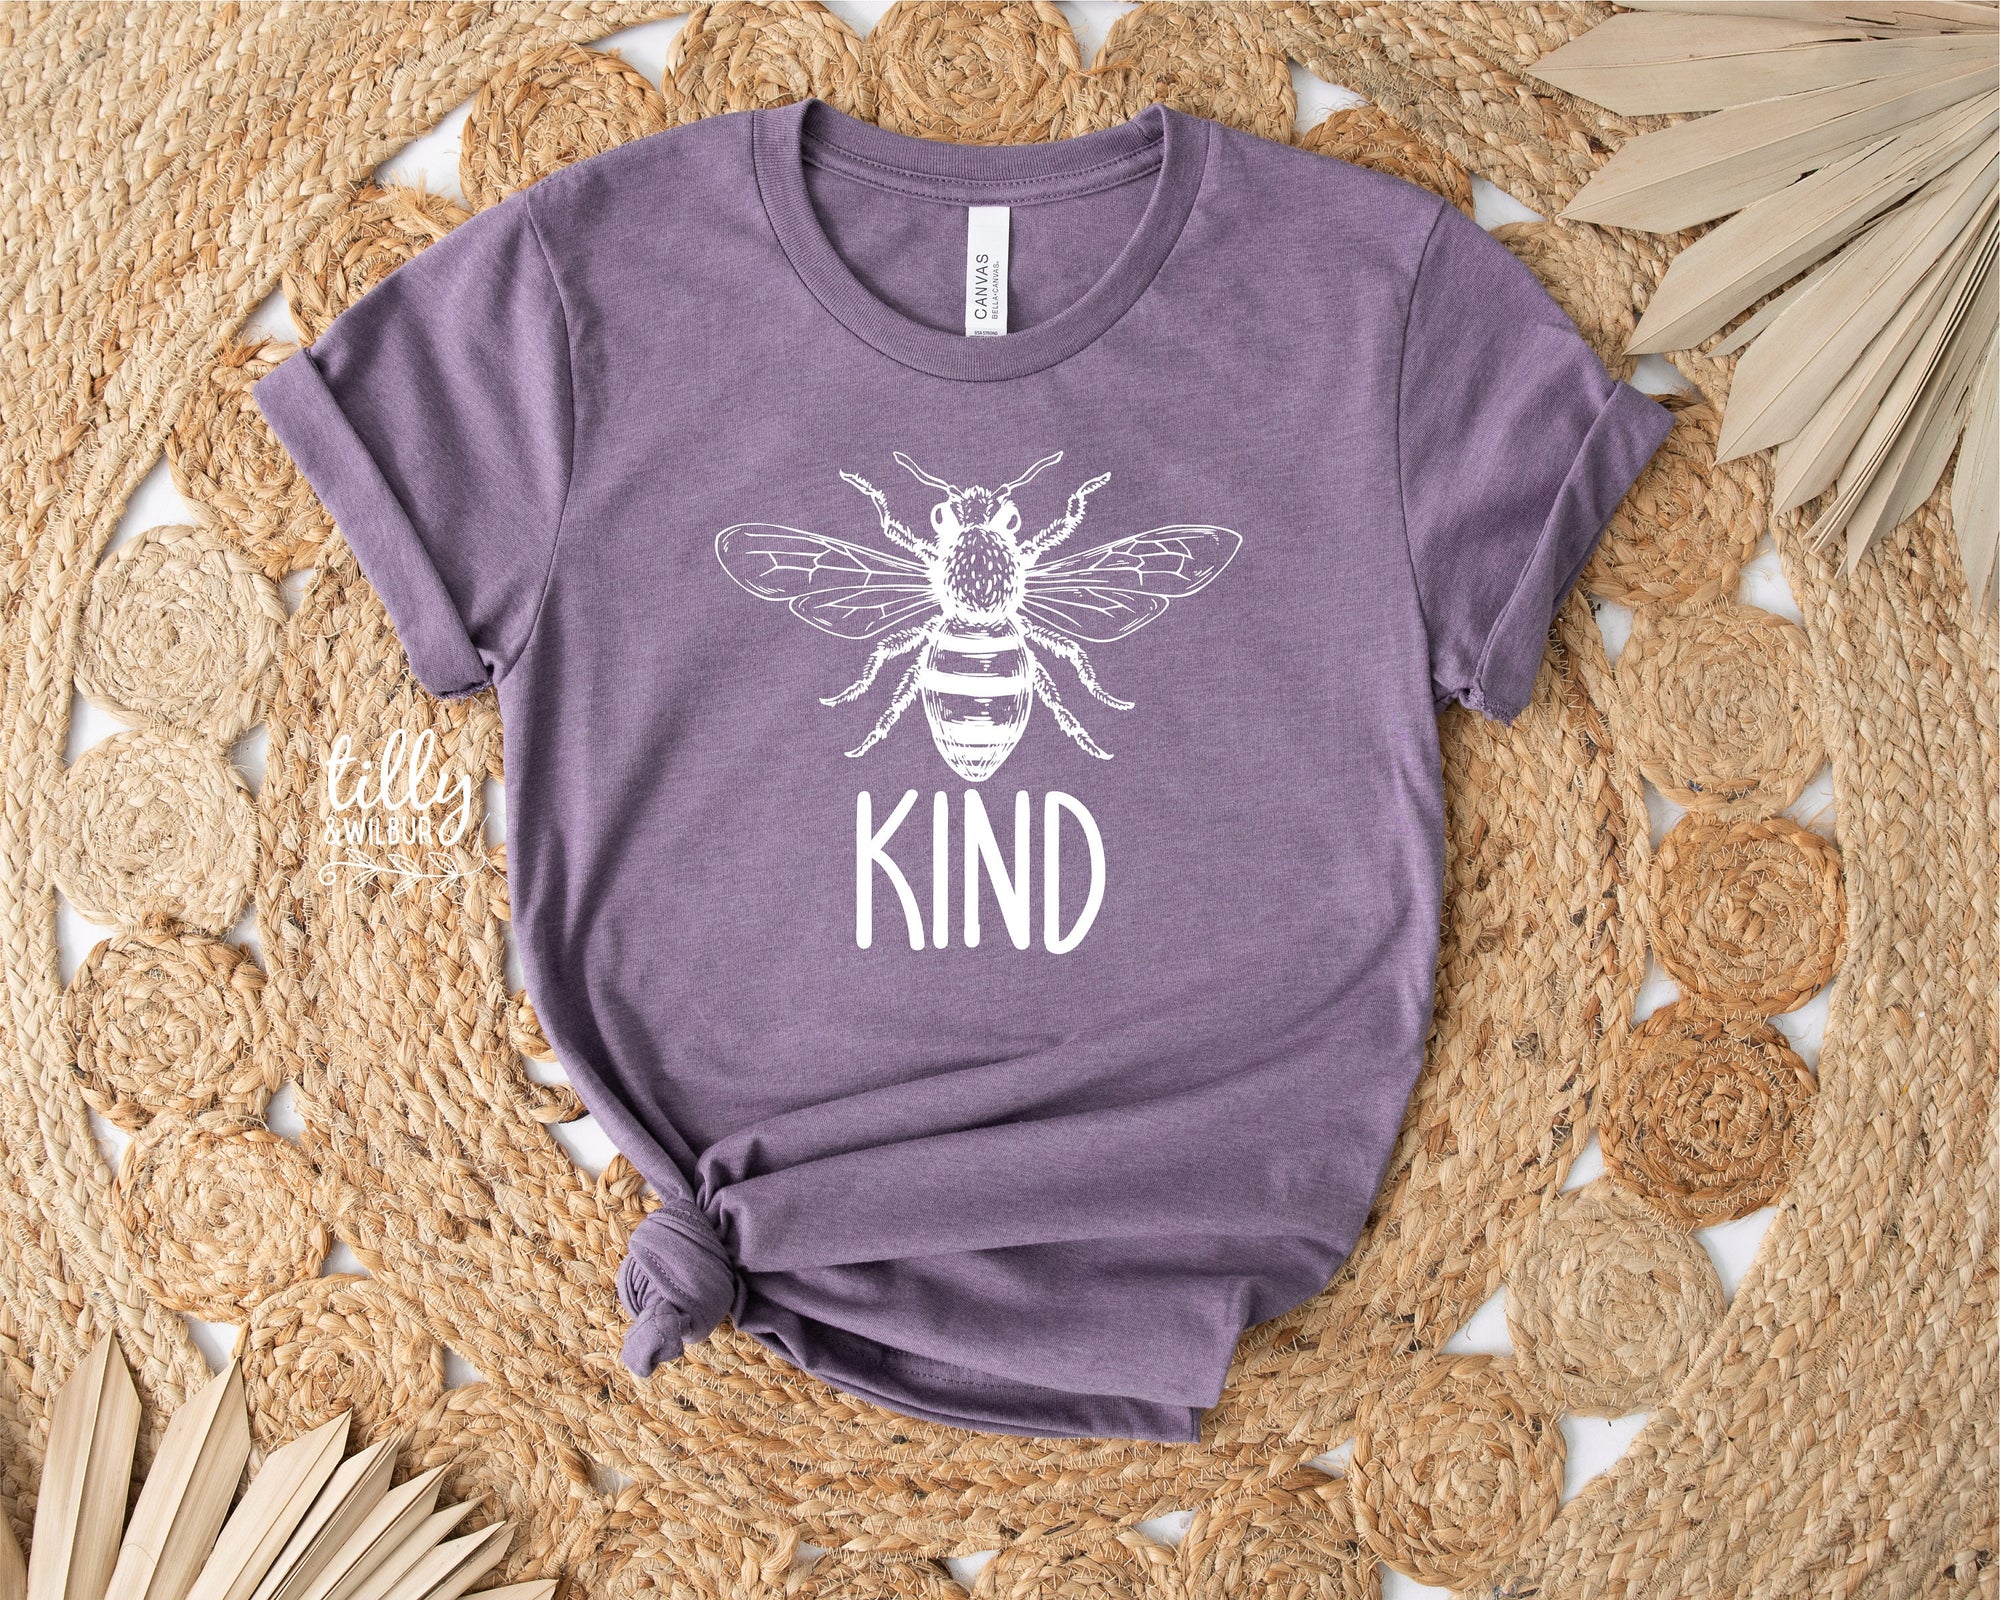 Be Kind Women's T-Shirt, Be Kind T-Shirt, Kindness T-Shirt, Inspirational Quotes Tees, Kindness Matters Clothing, Gift For Her, Bee T-Shirt